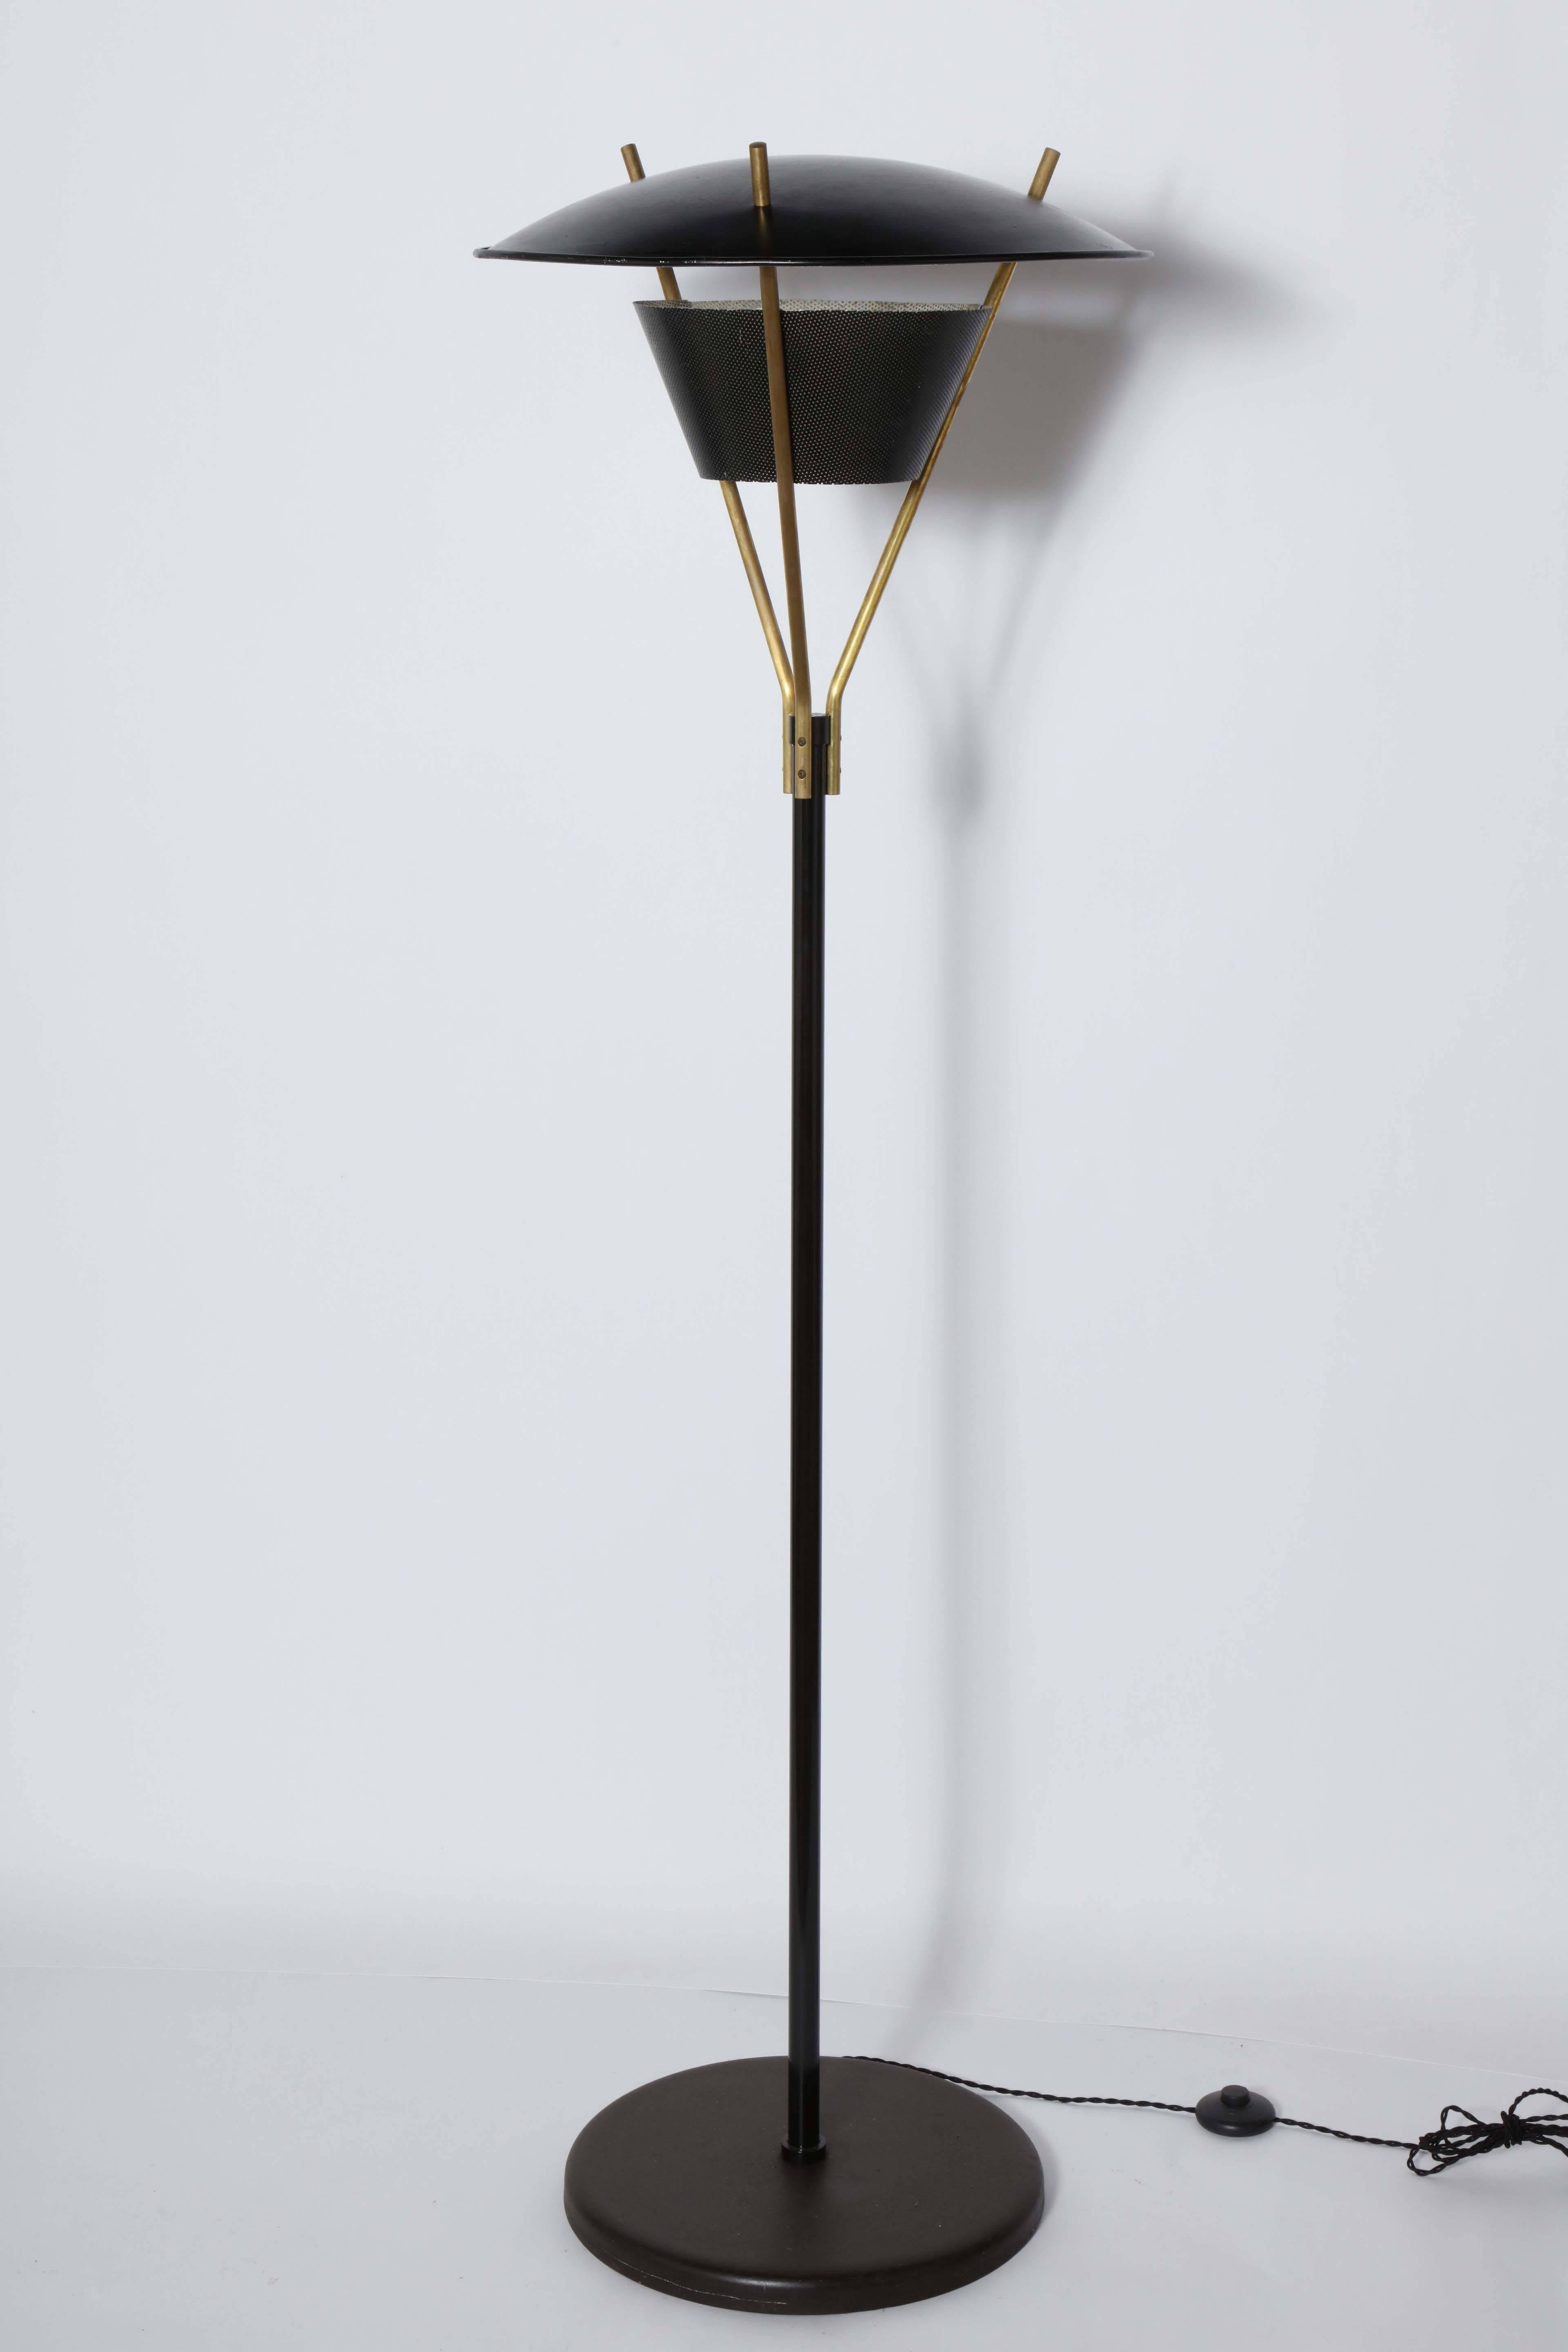 Substantial Thomas Moser for Lightolier Black Enamel and Brass Floor Lamp from the 1950's. Featuring tubular Black enameled column, Brass tripod arms, rounded 20D Black hood Shade with White interior, perforated Black cone neck with White Interior